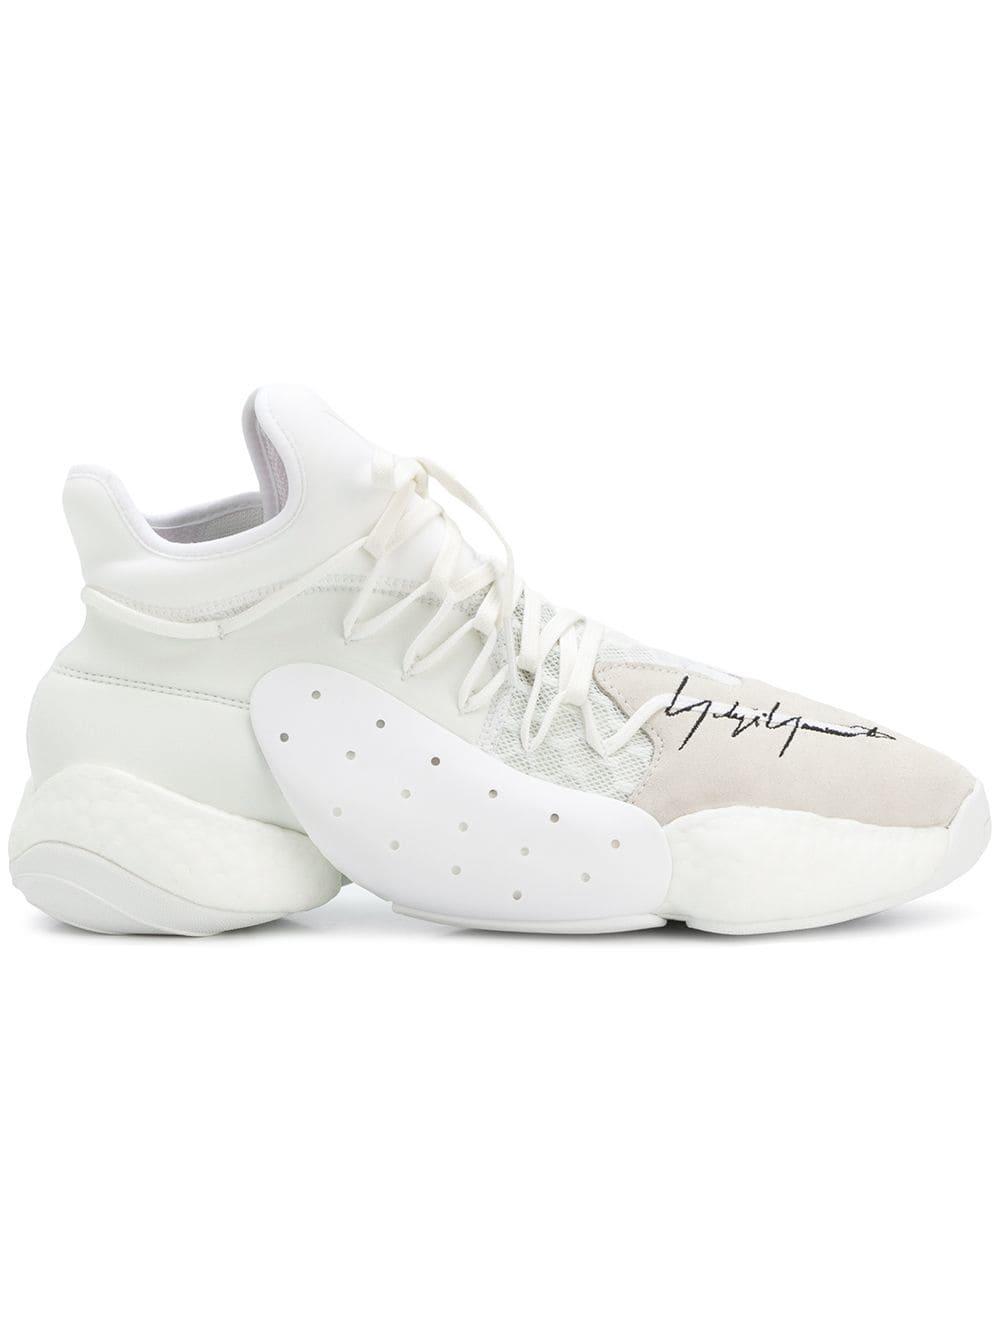 Y-3 Synthetic X James Harden Byw Bball Sneakers in White for Men - Lyst